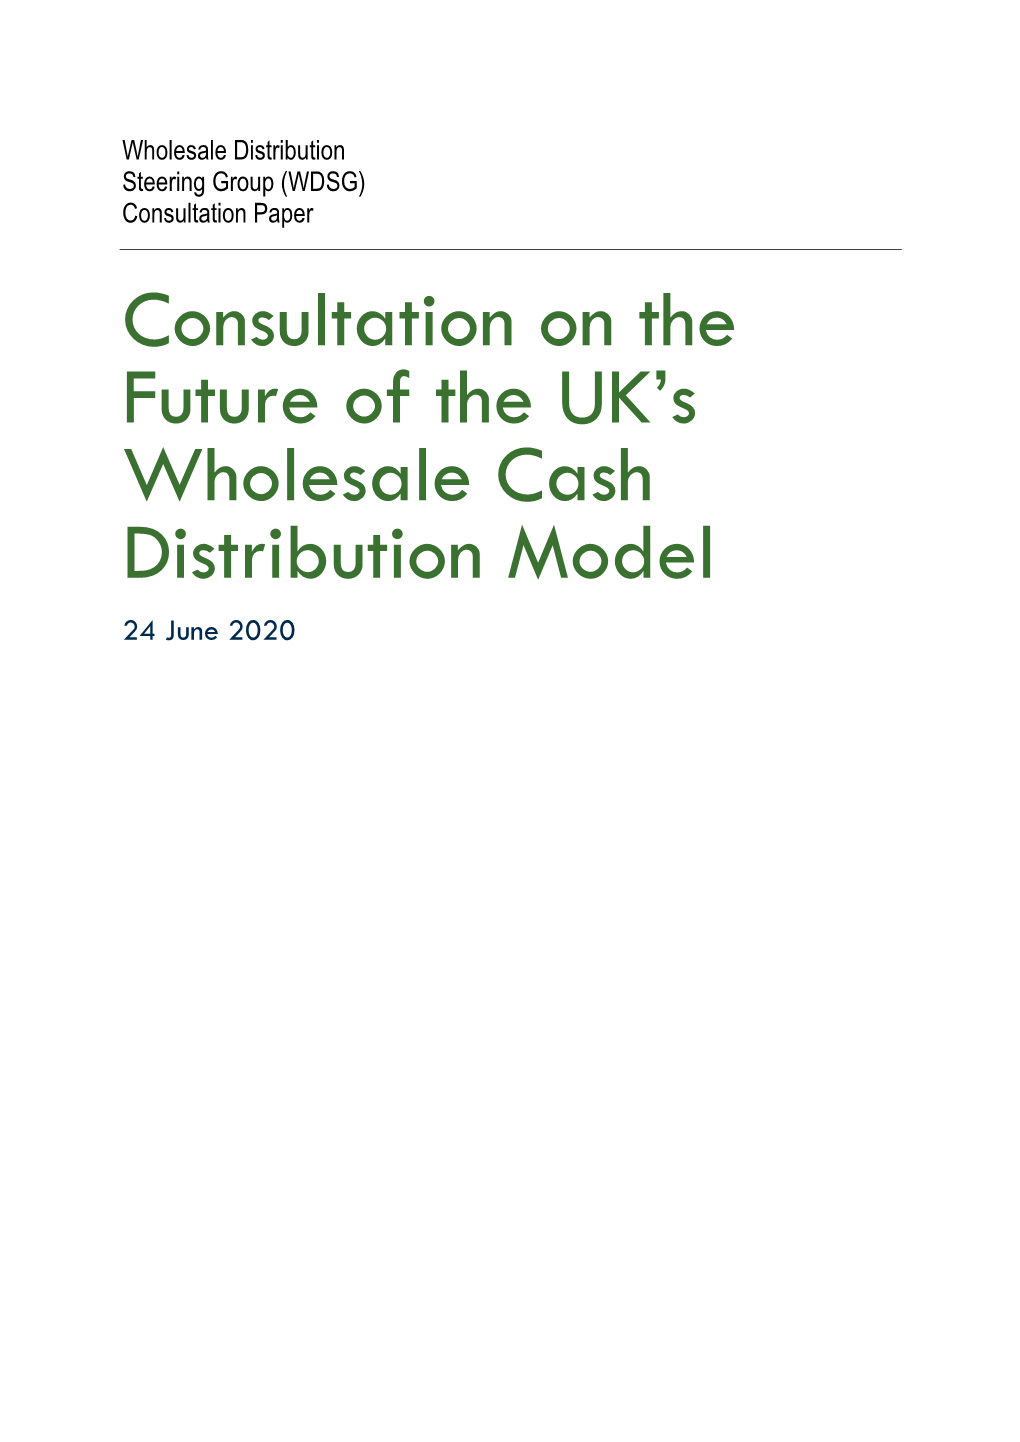 Consultation on the Future of the UK's Wholesale Cash